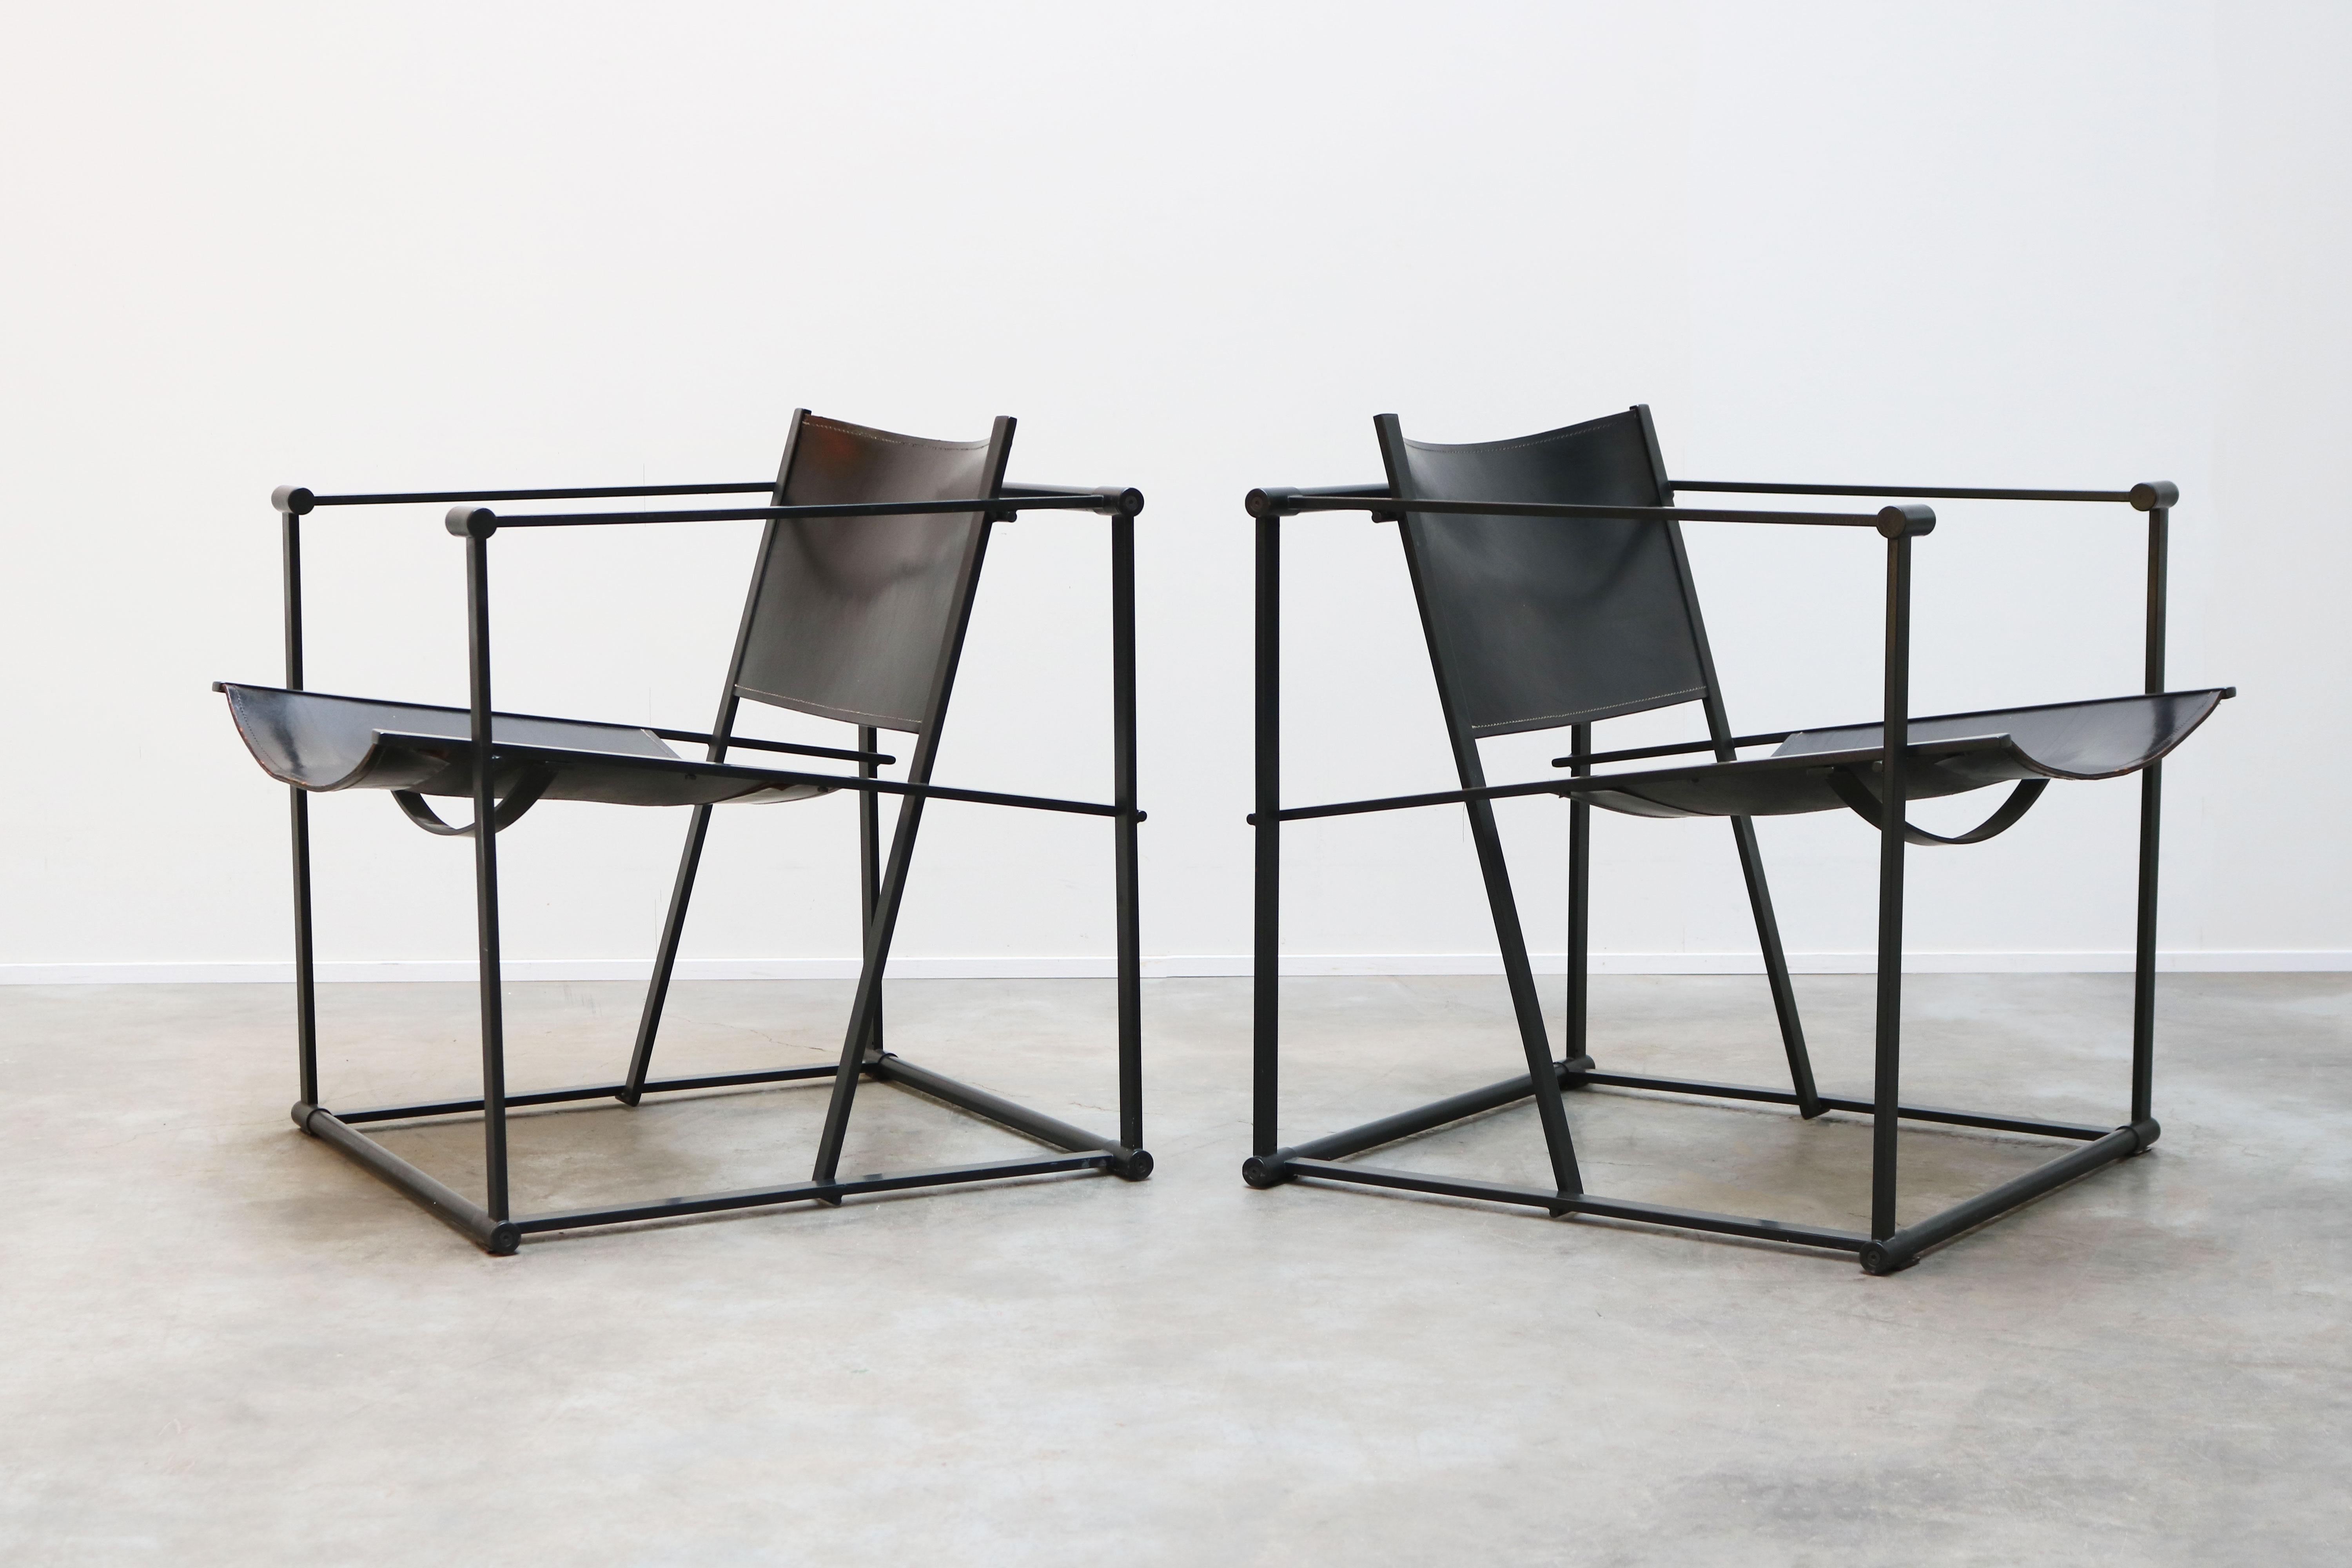 This set of 2, FM60 chairs was designed by Radboud Van Beekum and manufactured by Pastoe in the 1980's Netherlands.
It has a black metal minimalist frame with original black leather seat & back rest.
Rare to find a gorgeous first edition pair like